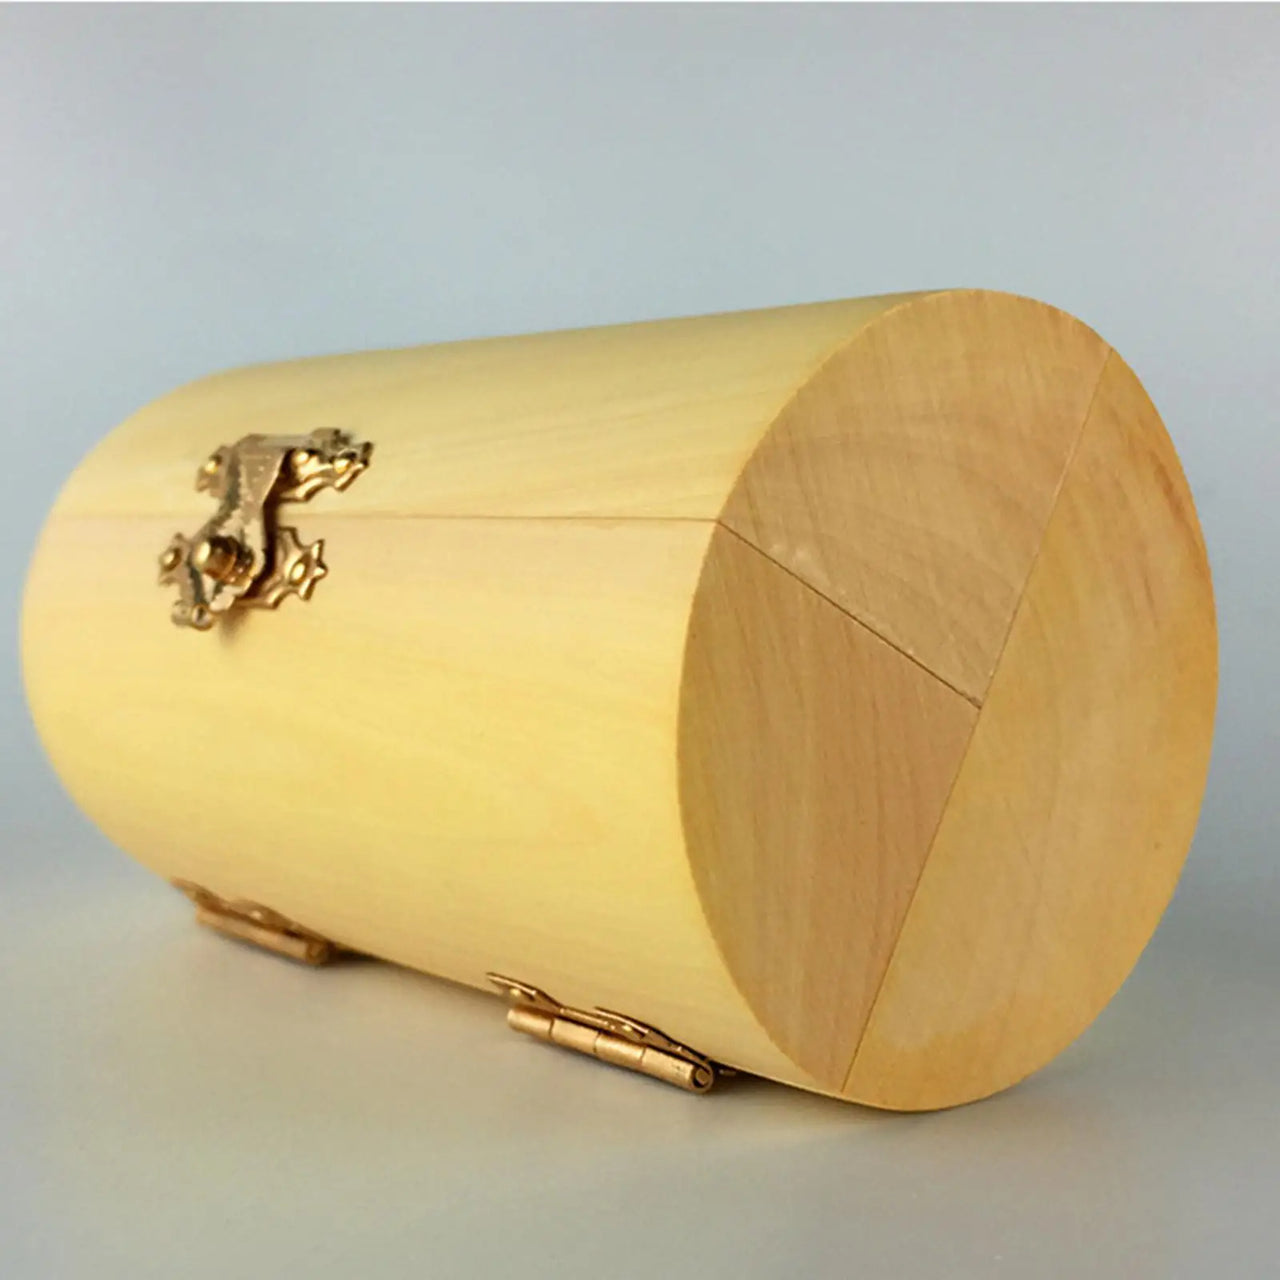 Openable Wooden Cylinder Sculpture